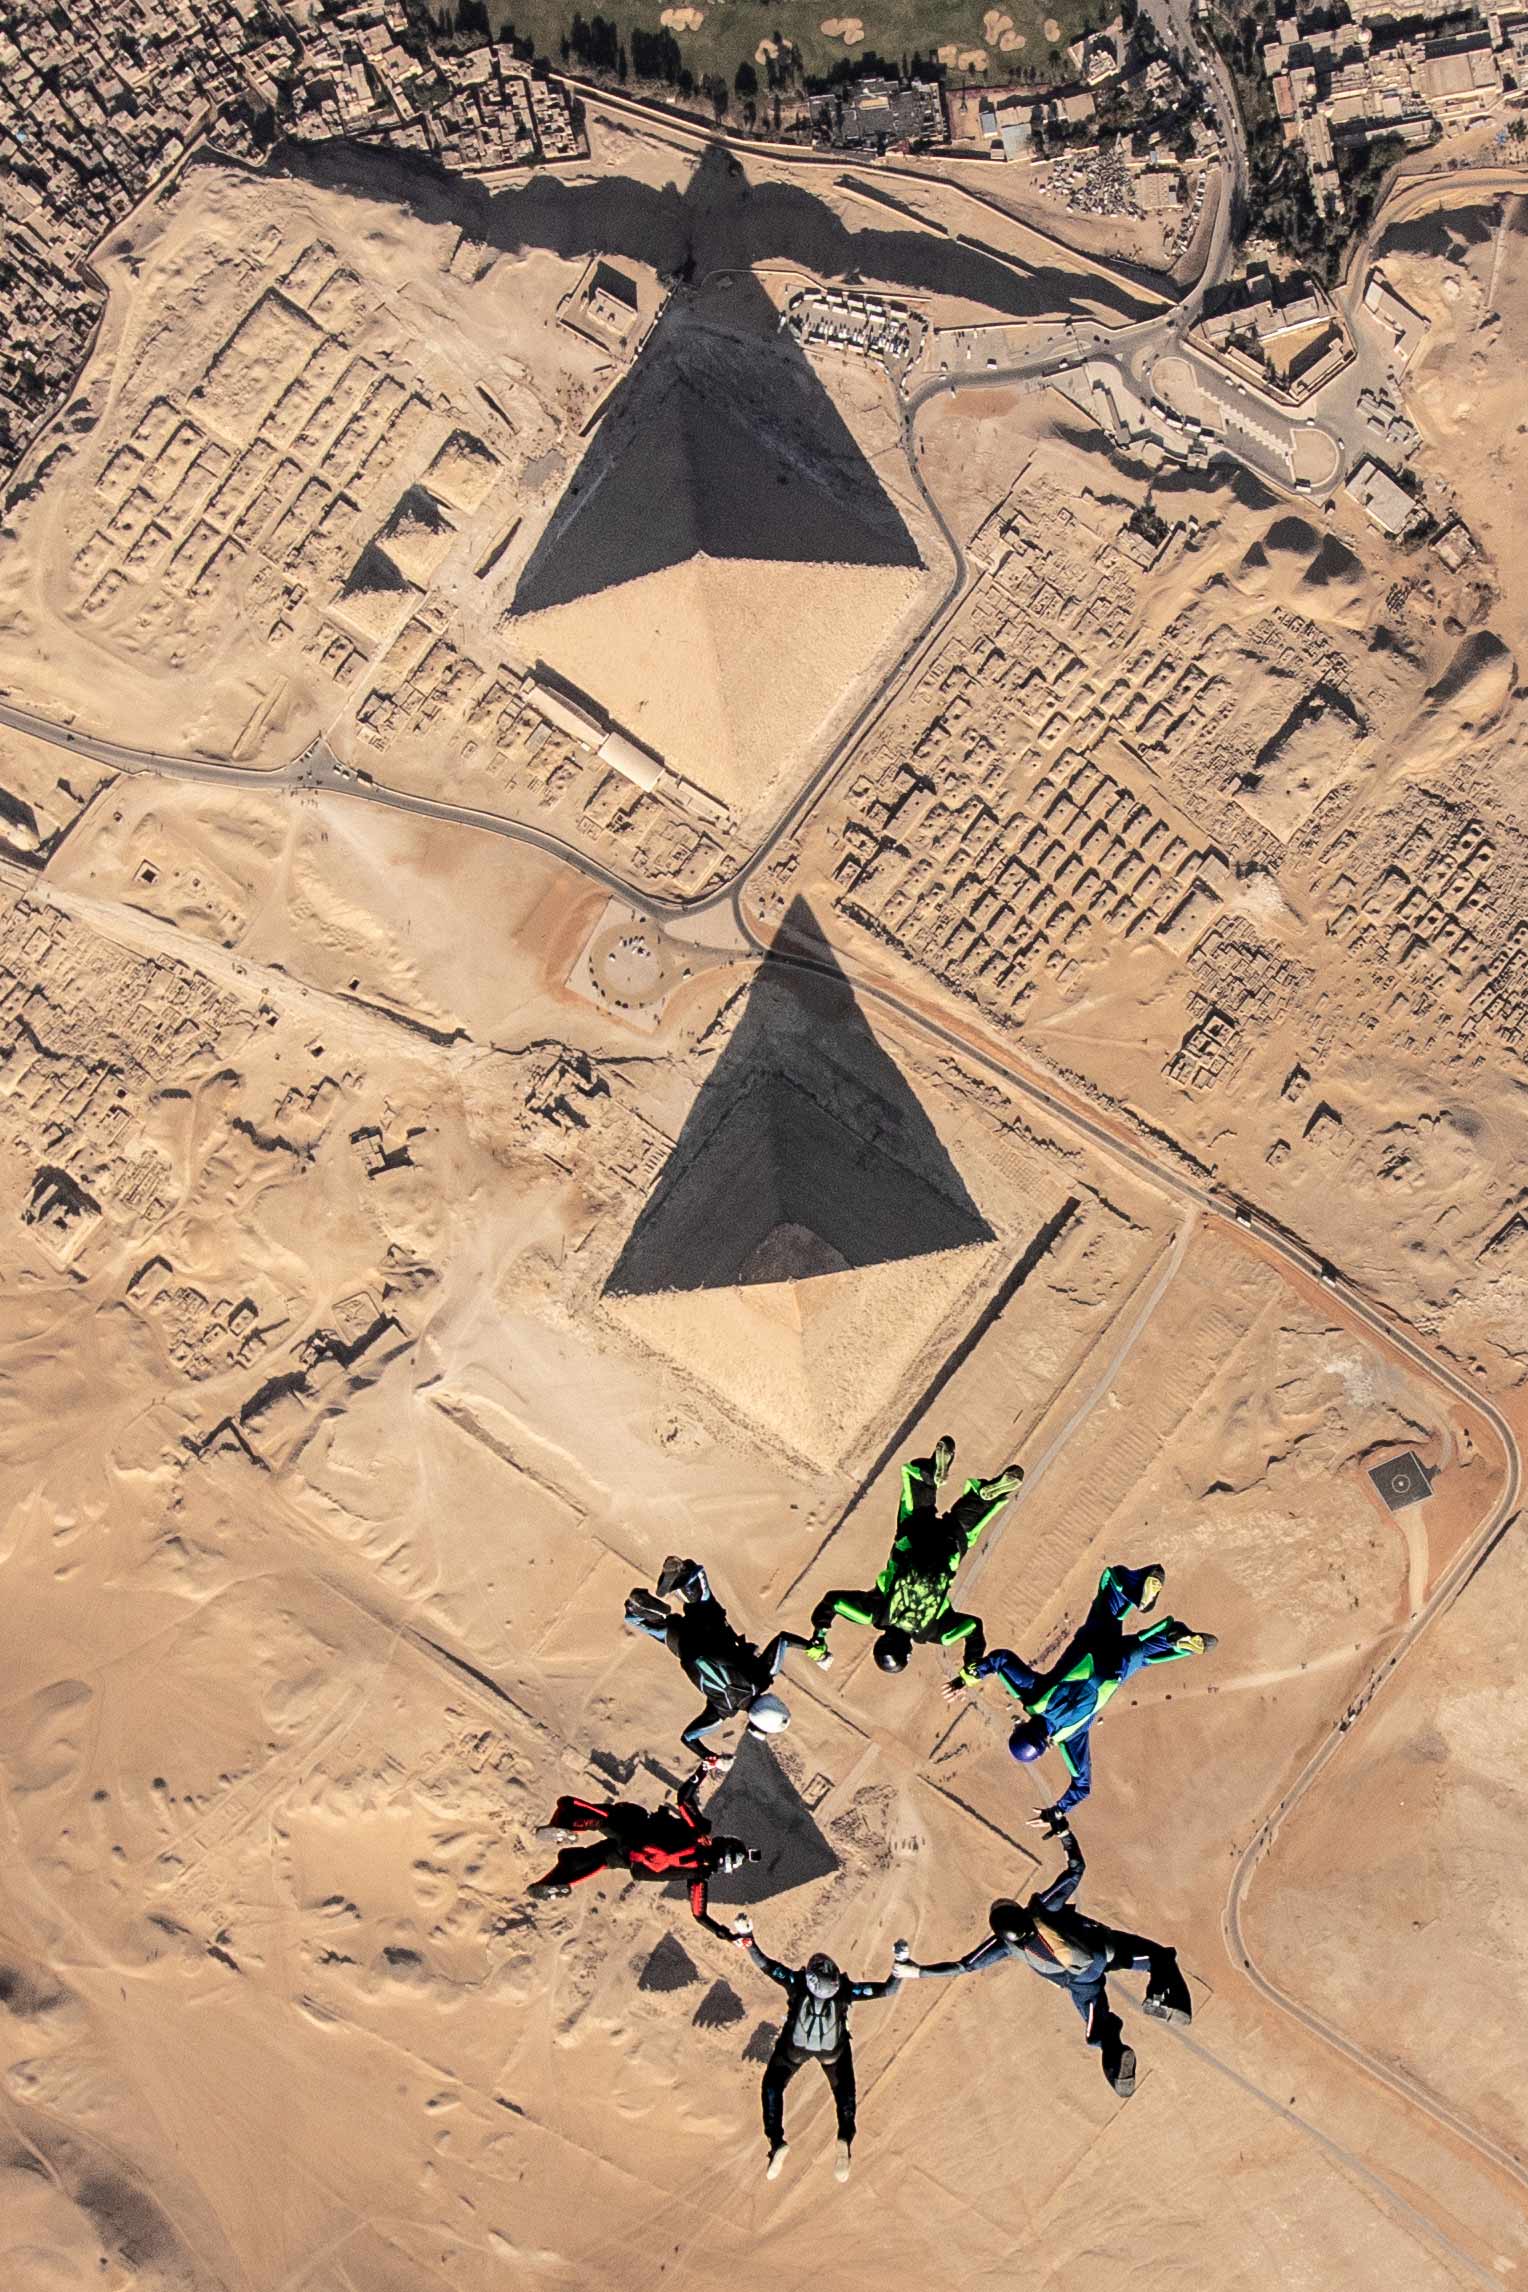 Shadow of Horus can only be seen by gods, aliens and skydivers.